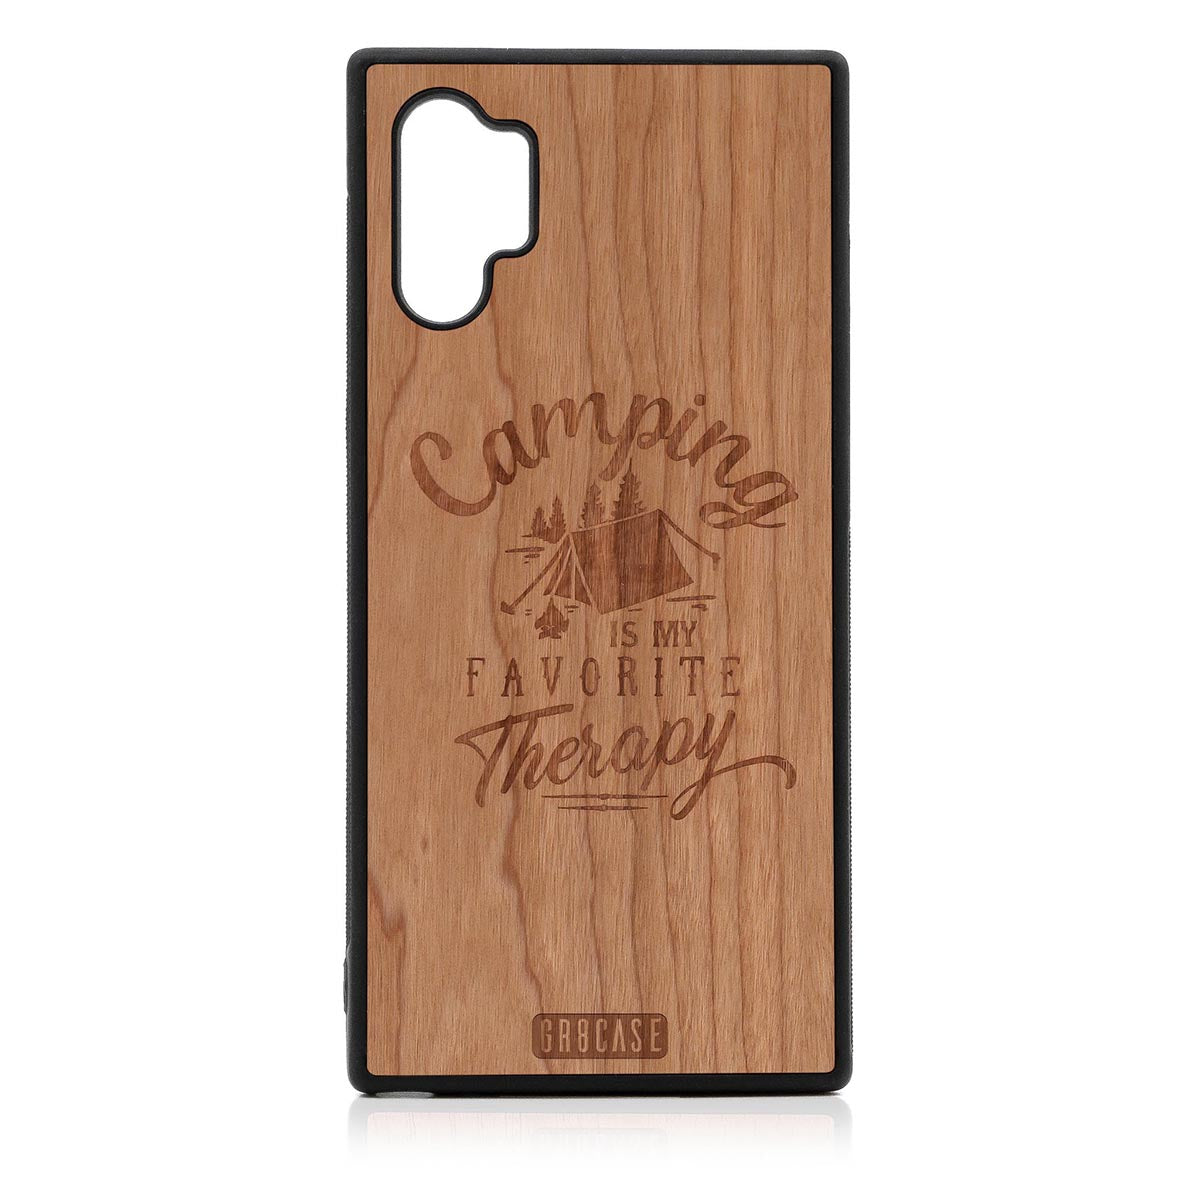 Camping Is My Favorite Therapy Design Wood Case For Samsung Galaxy Note 10 Plus by GR8CASE